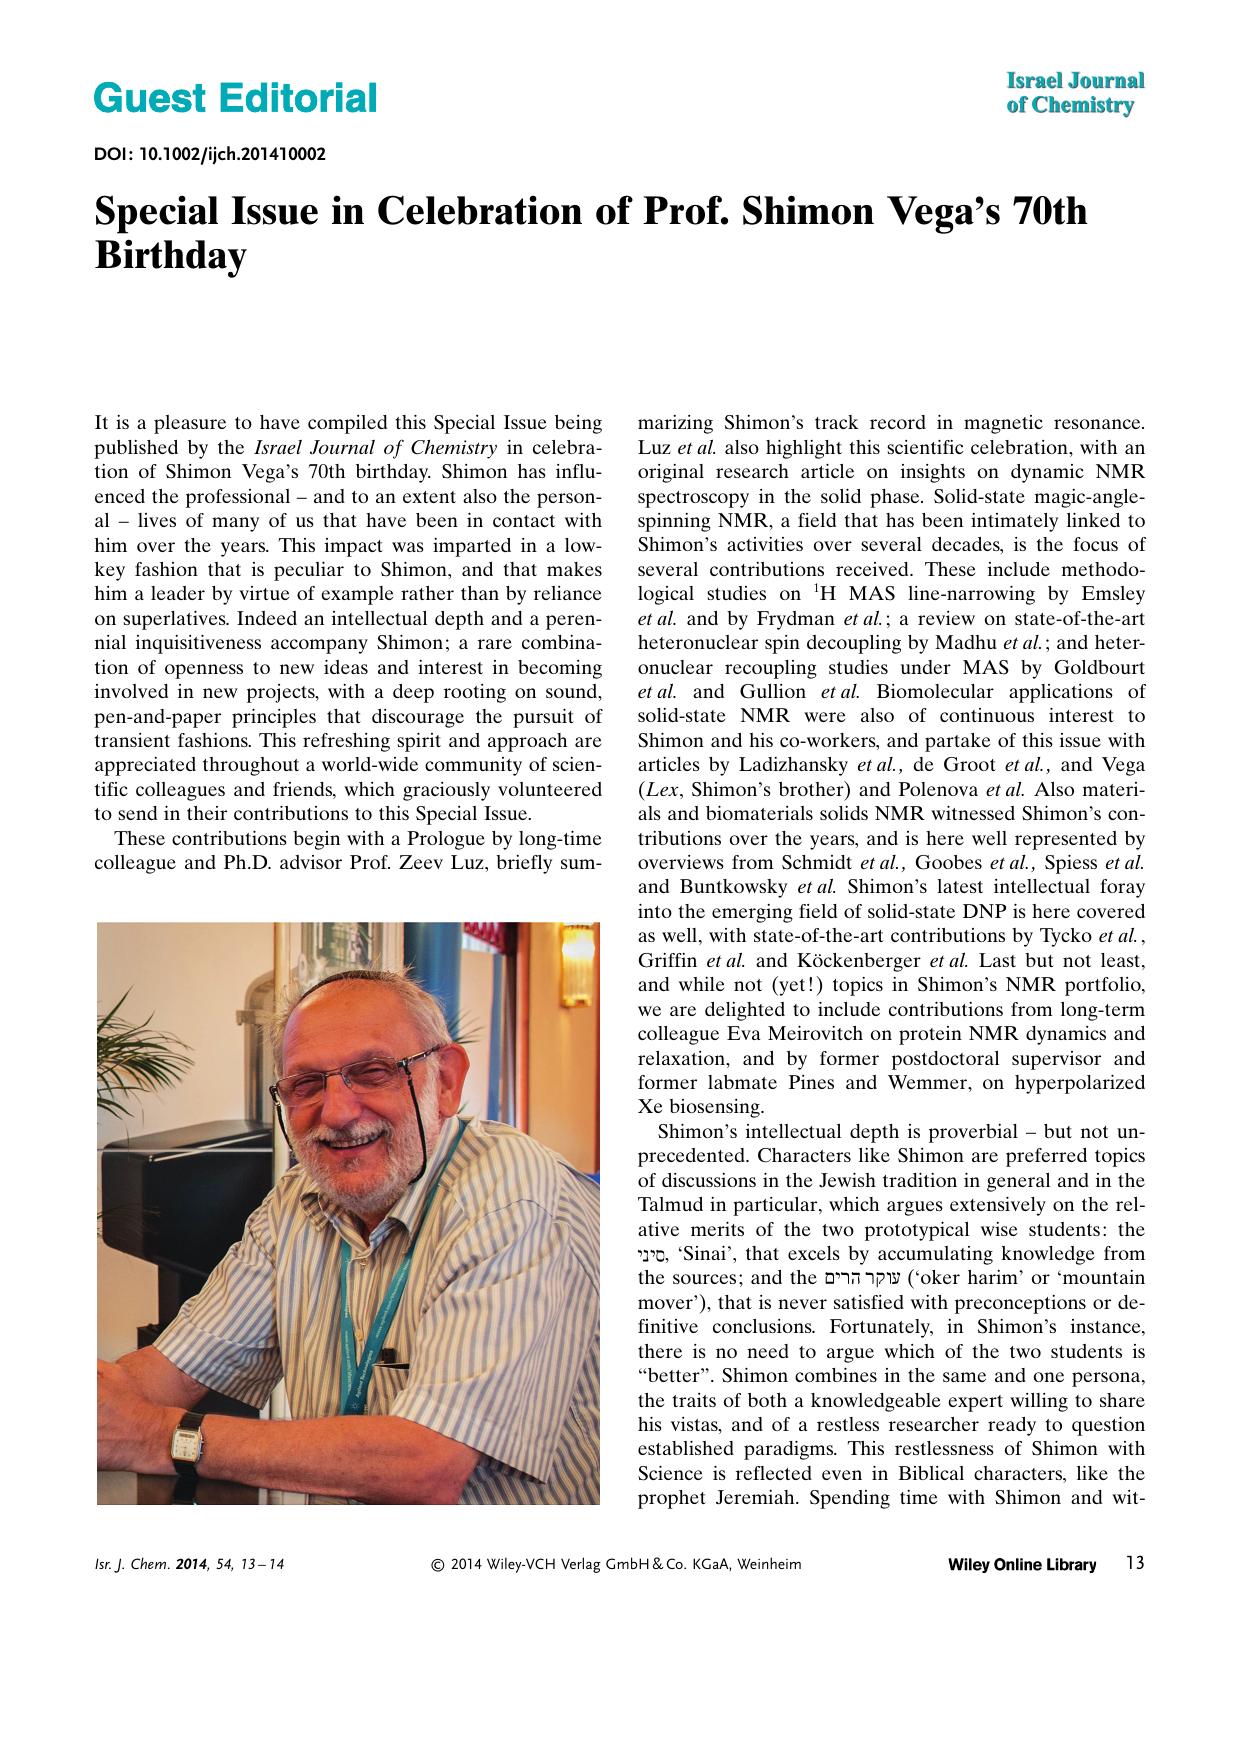 Guest Editorial: Special Issue in Celebration of Prof. Shimon Vegas 70th Birthday by Unknown